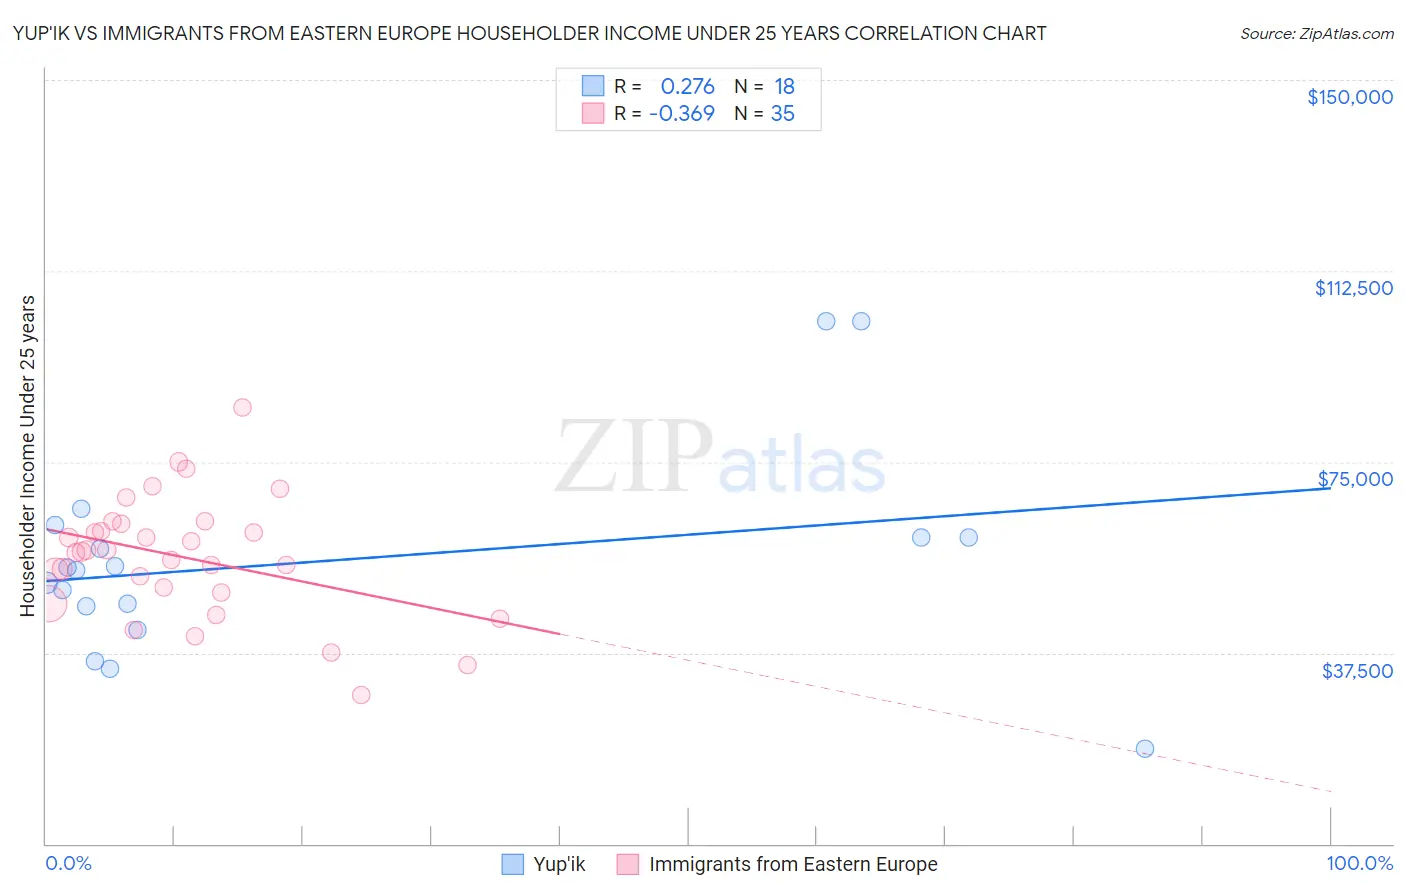 Yup'ik vs Immigrants from Eastern Europe Householder Income Under 25 years